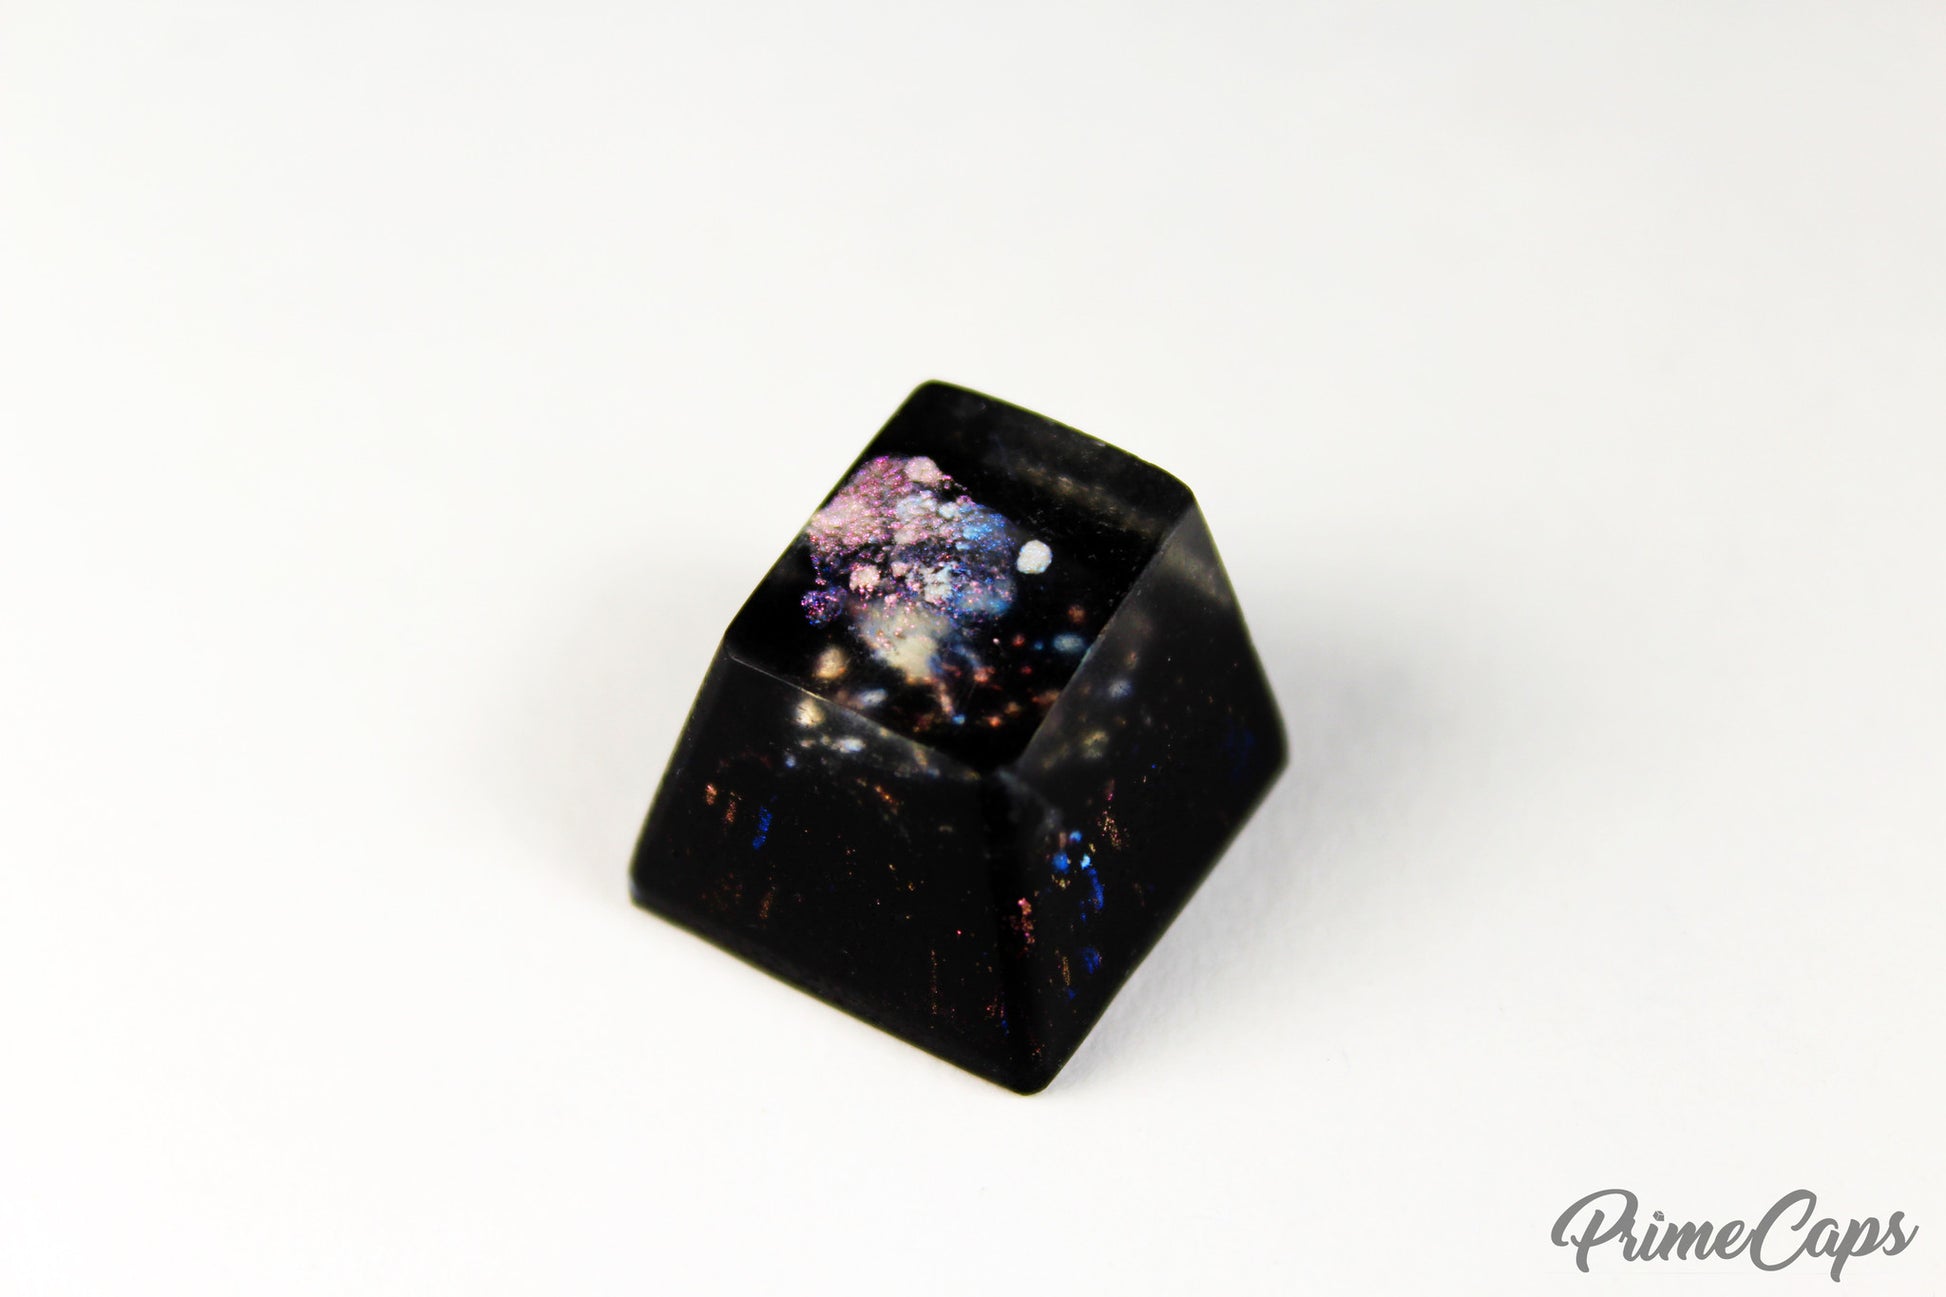 Chaos Caps 1.1 - Deep Field - PrimeCaps Keycap - Blank and Sculpted Artisan Keycaps for cherry MX mechanical keyboards 